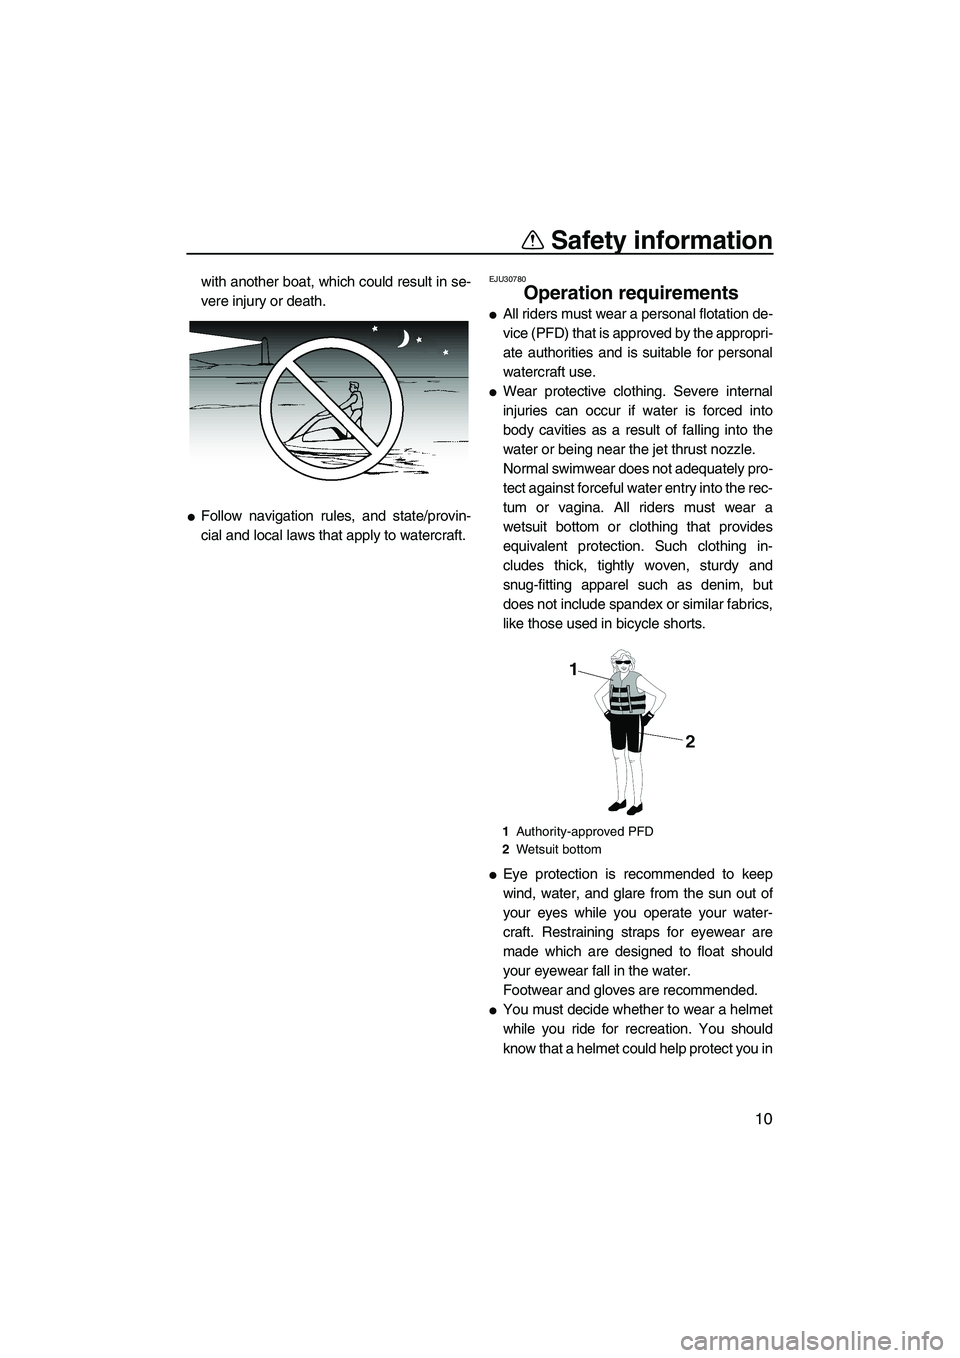 YAMAHA SUPERJET 2007 User Guide Safety information
10
with another boat, which could result in se-
vere injury or death.
Follow navigation rules, and state/provin-
cial and local laws that apply to watercraft.
EJU30780
Operation re